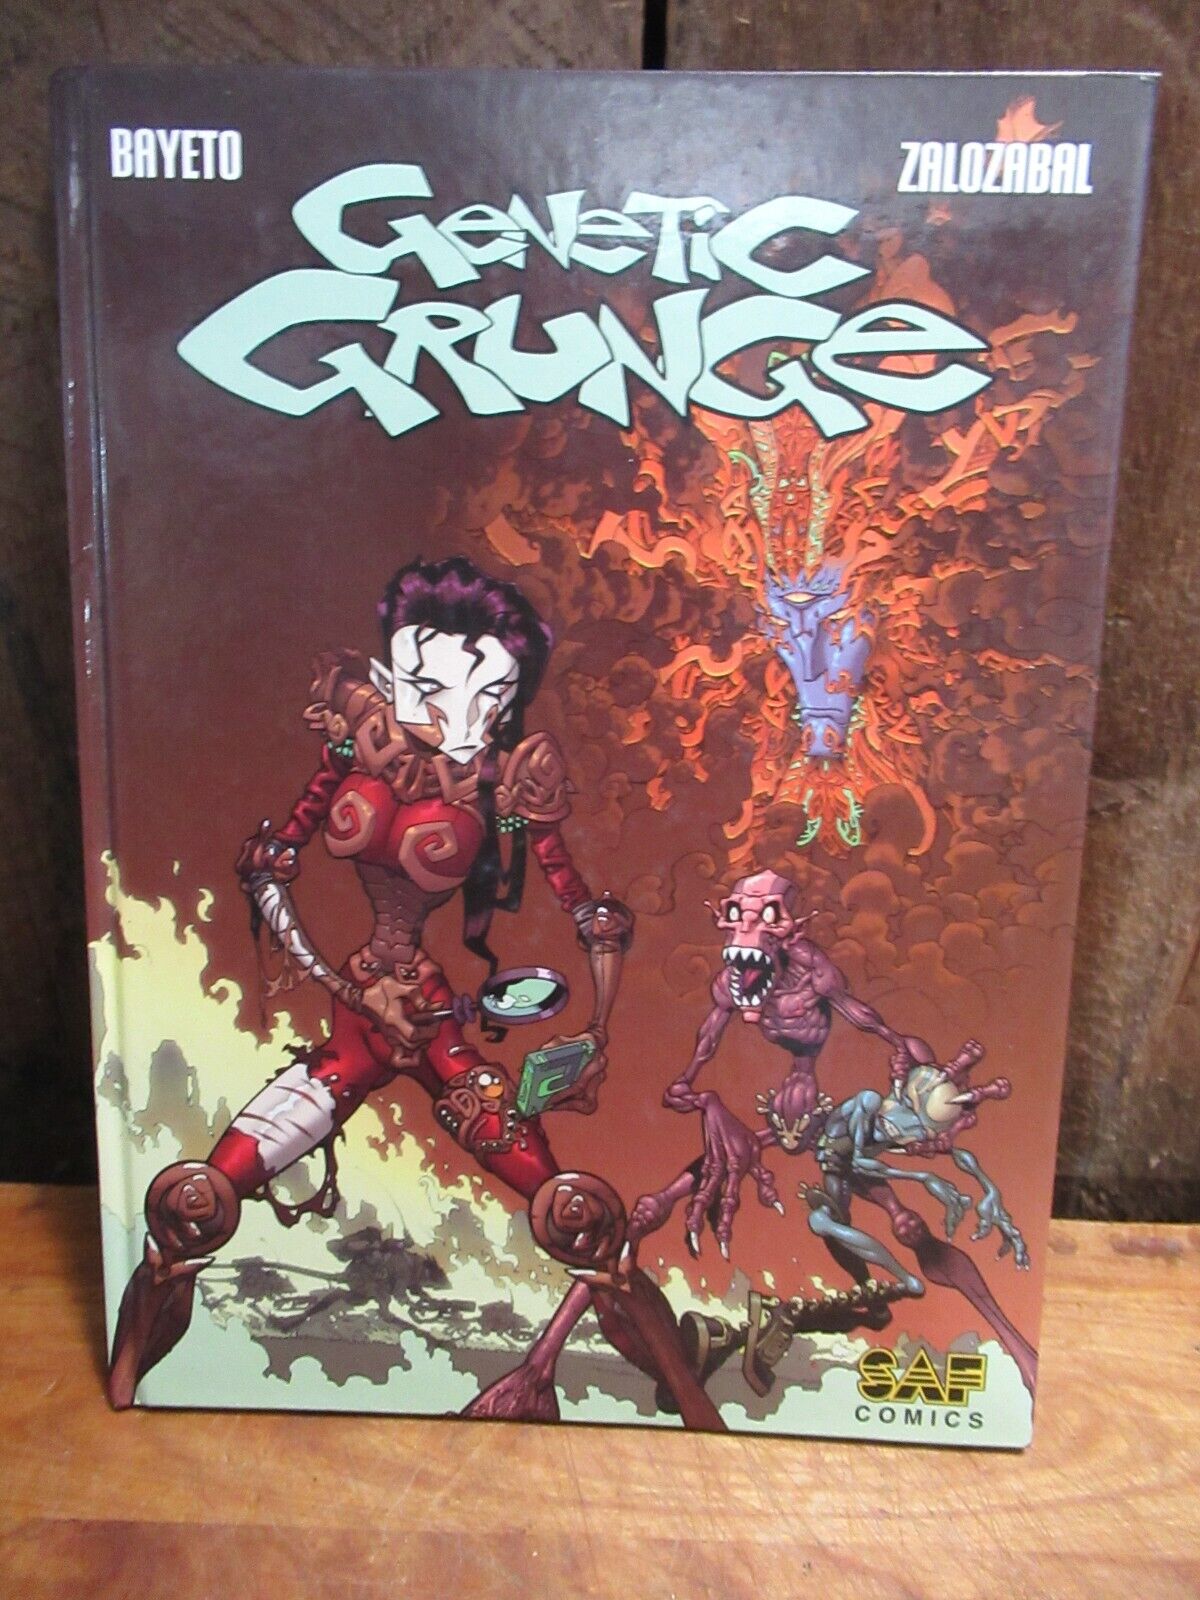 Genetic Grunge By Dark Horse Comics Hardcover Great Condition Vol. 2